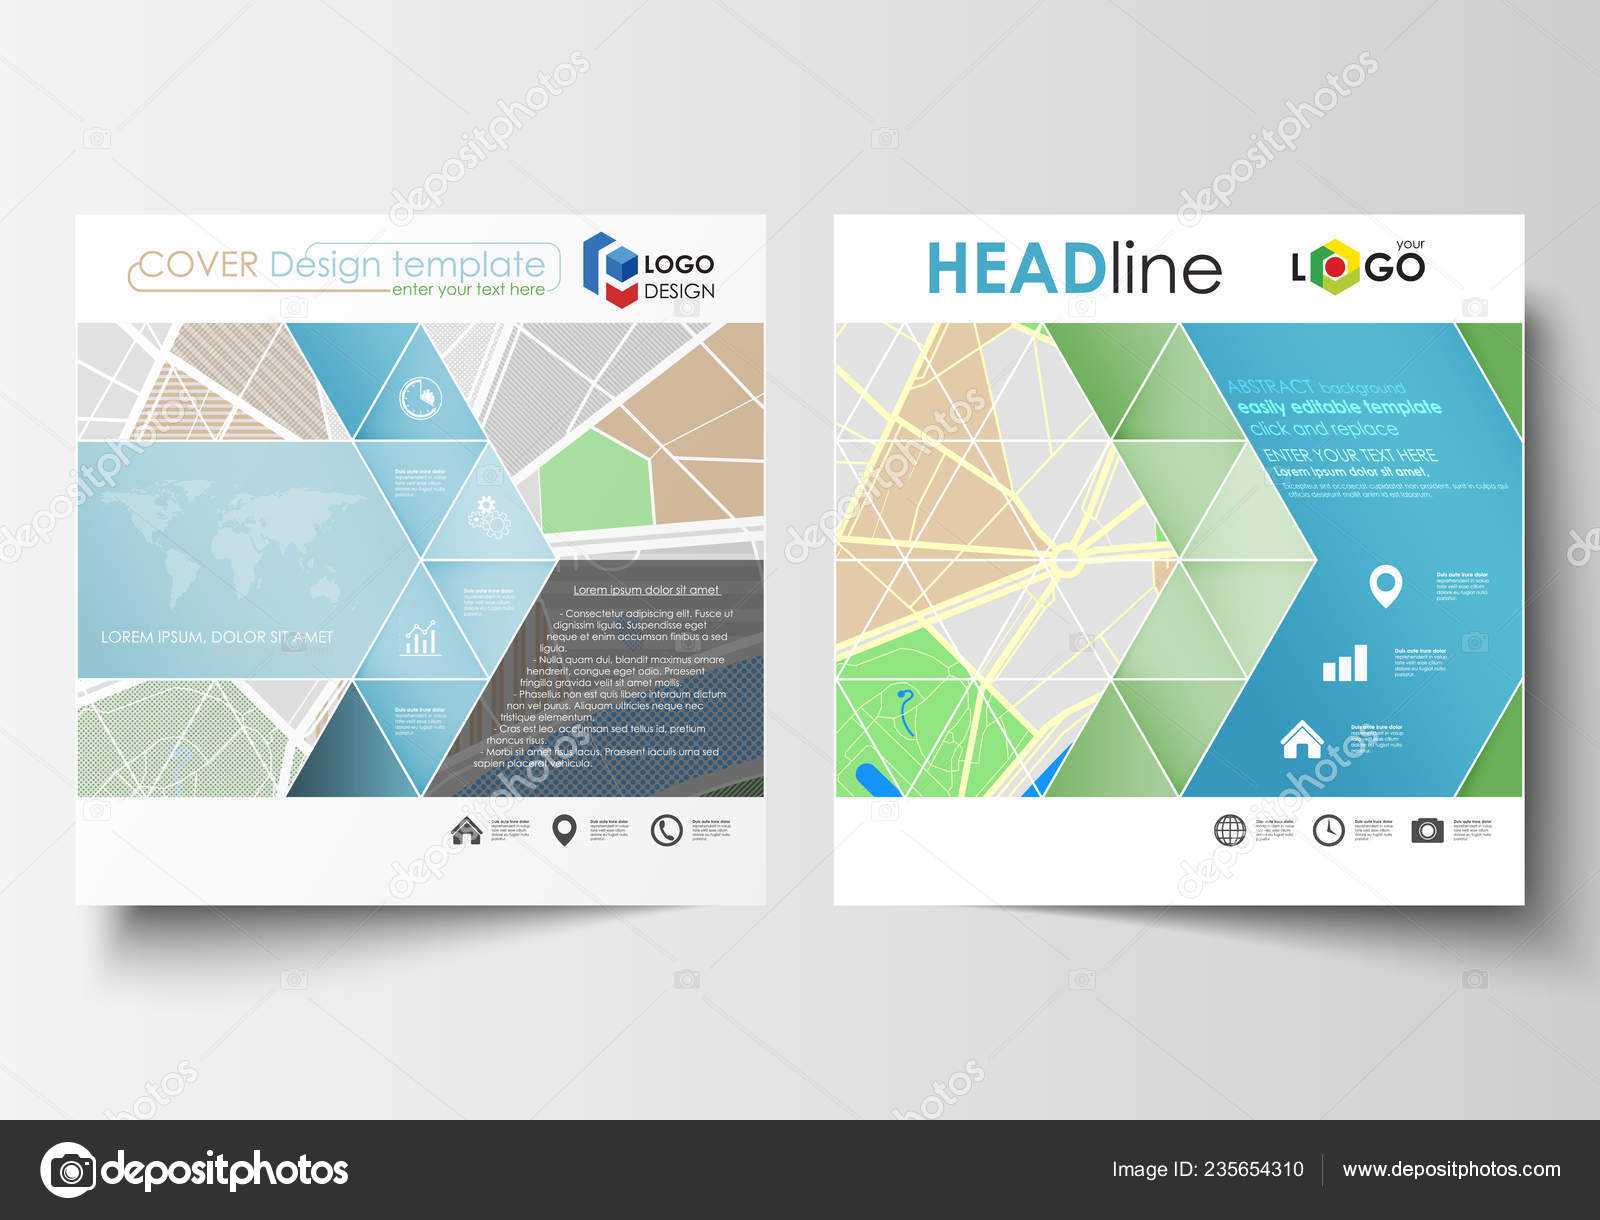 Business Templates For Square Brochure, Magazine, Flyer Throughout Blank City Map Template